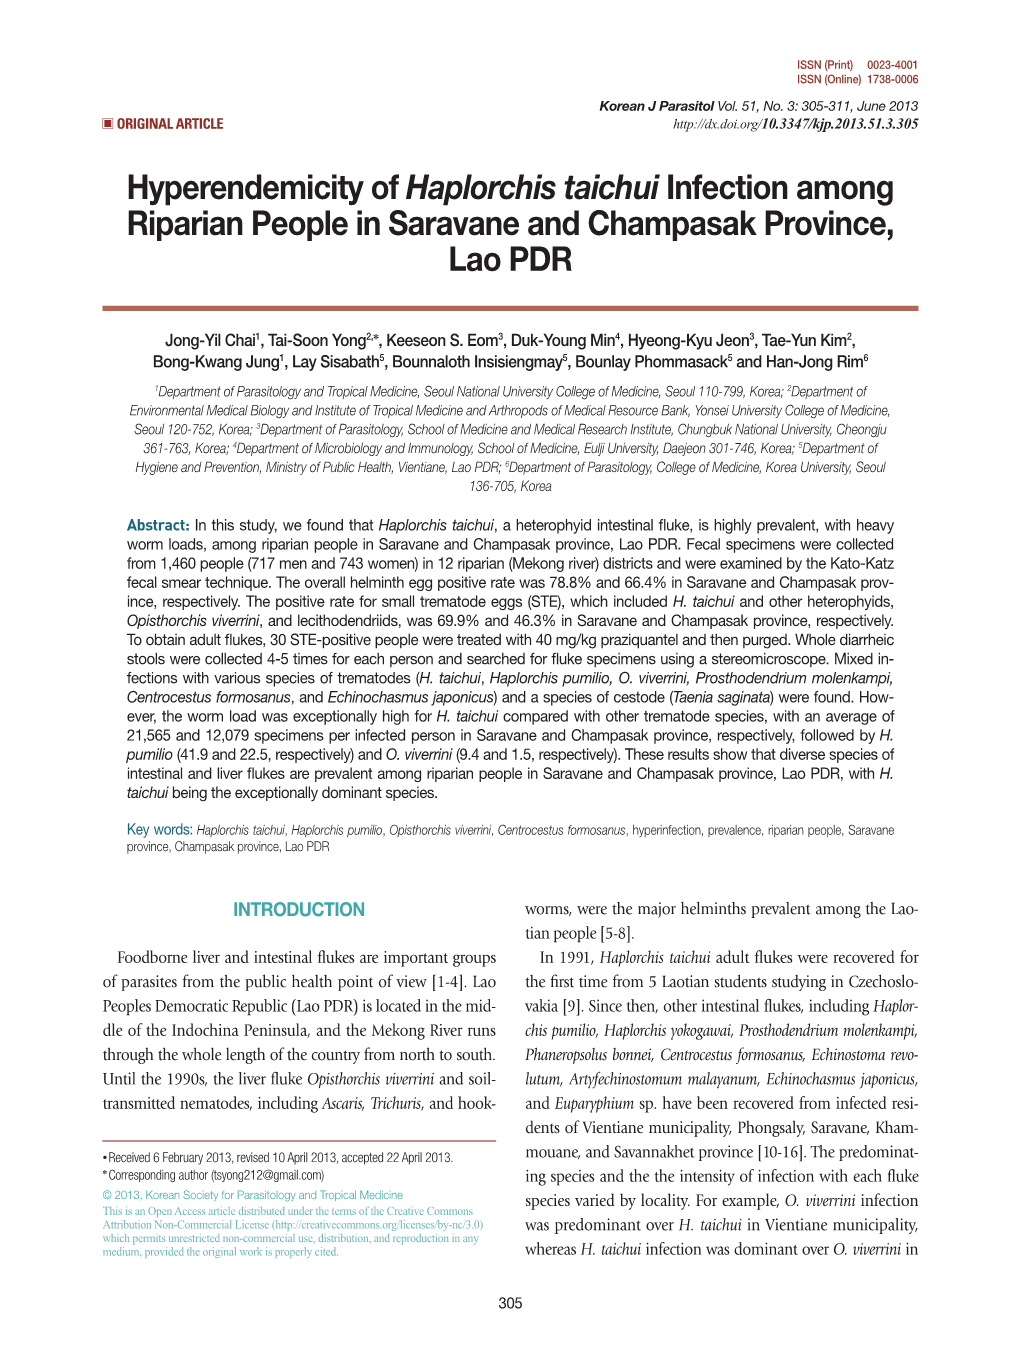 Haplorchis Taichui Infection Among Riparian People in Saravane and Champasak Province, Lao PDR